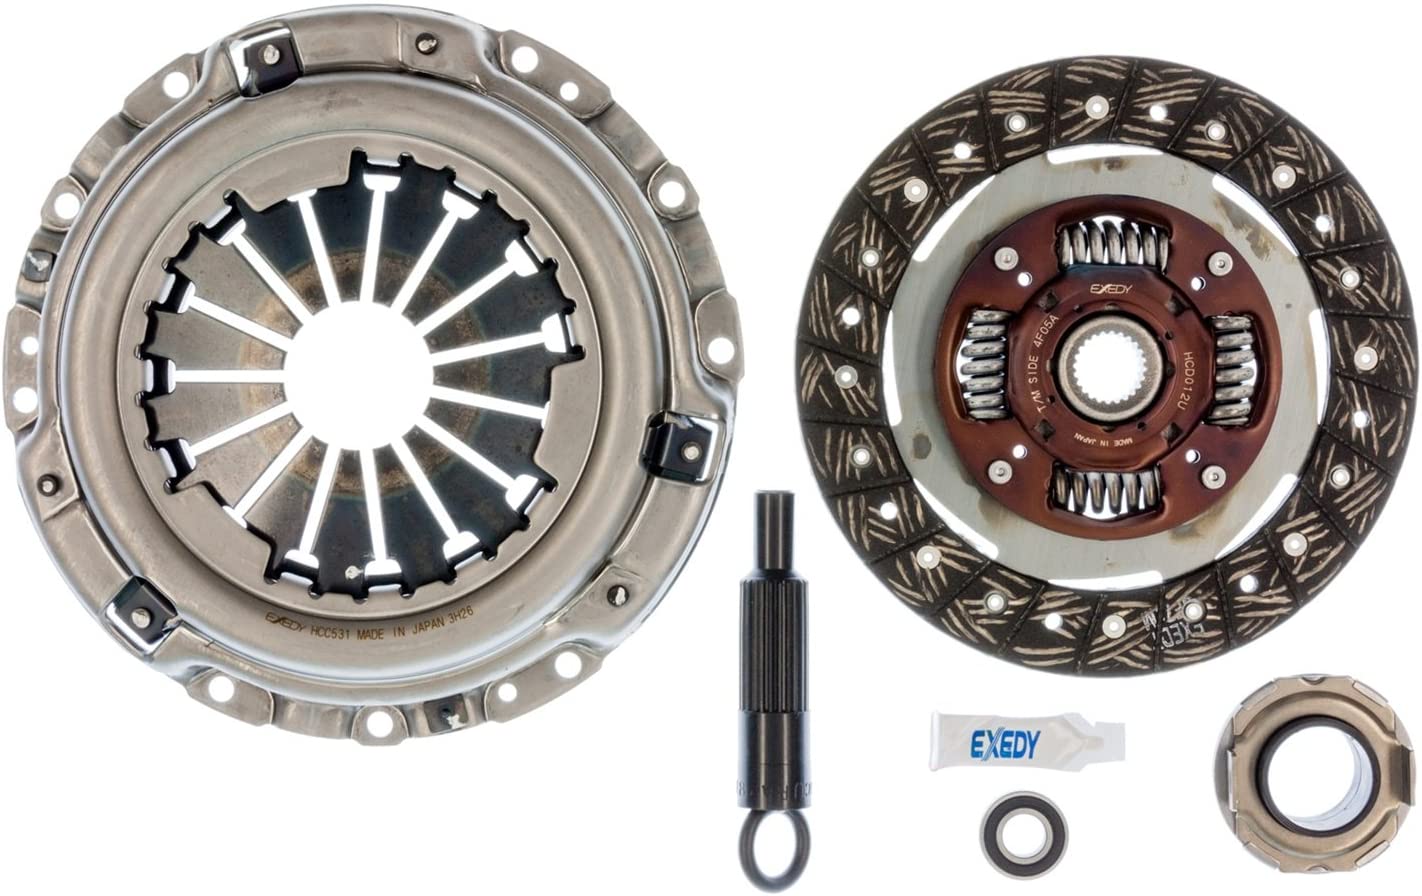 EXEDY 08017 OEM Replacement Clutch Kit